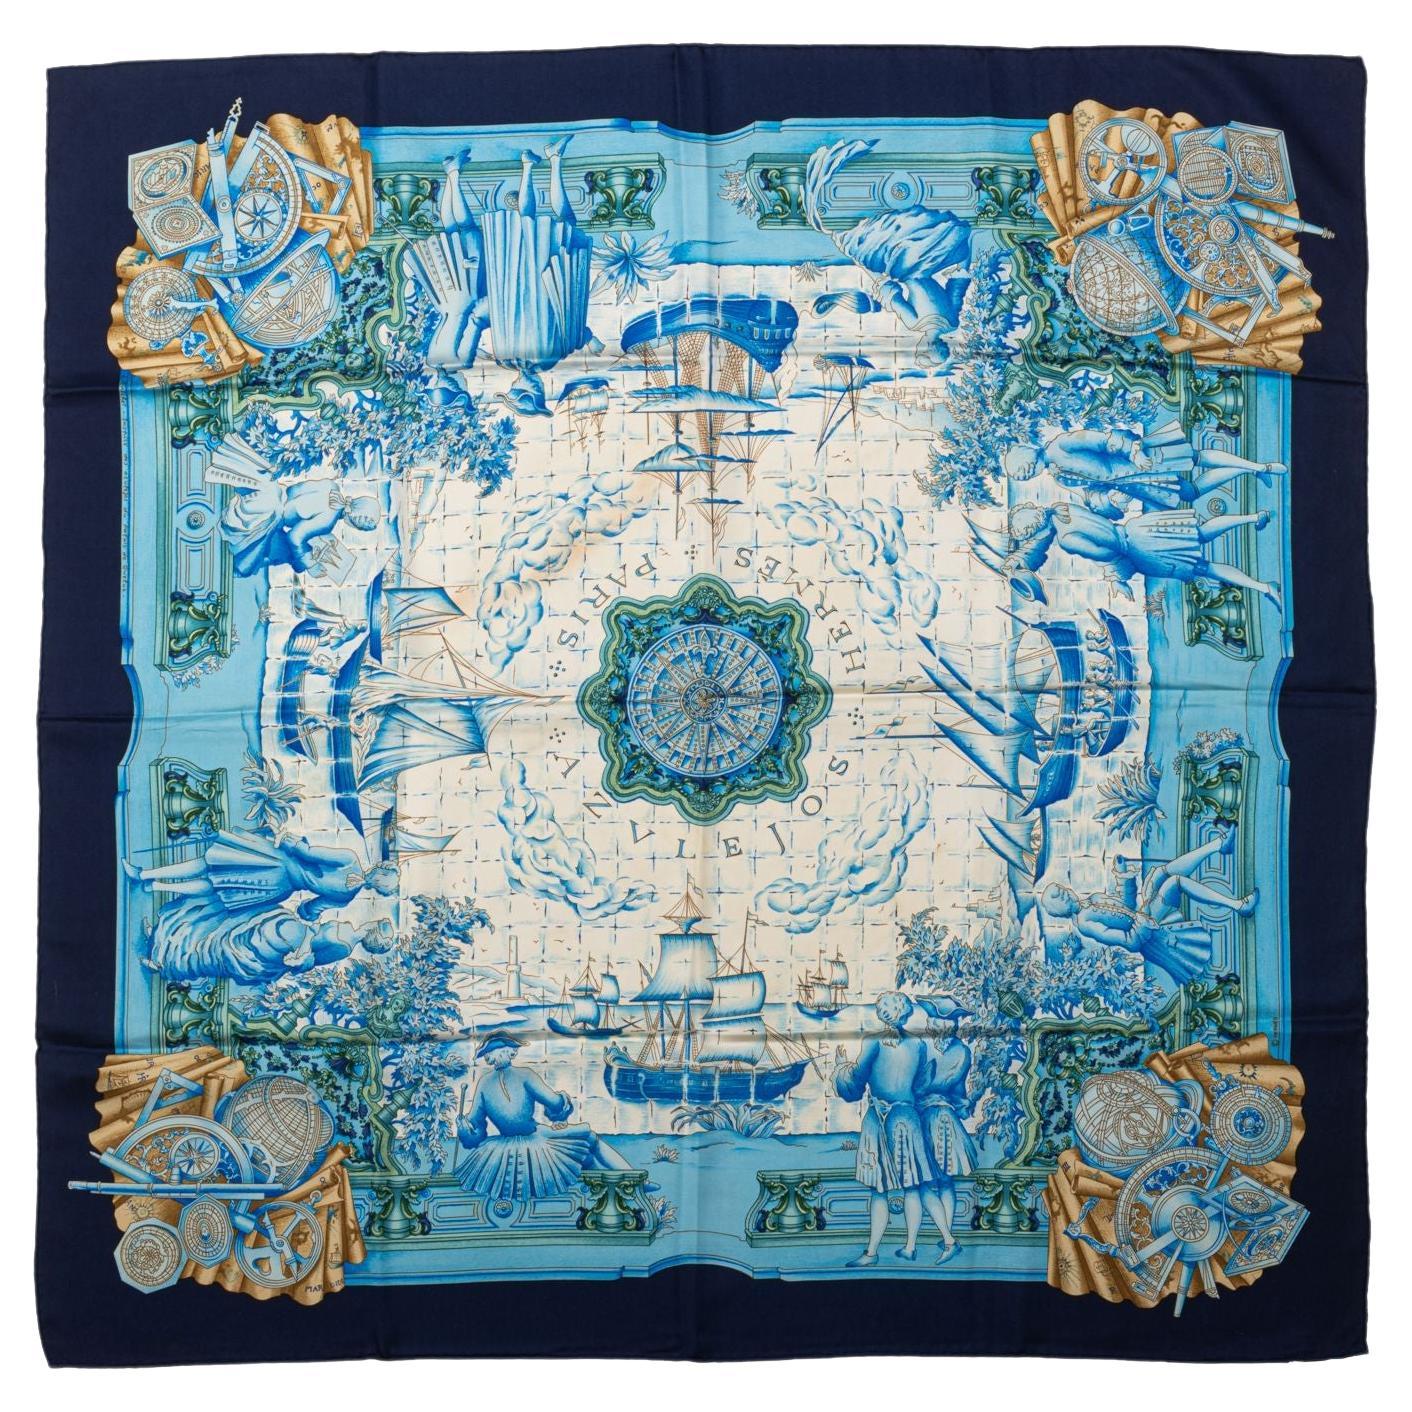 Hermès new collectible black and blue "Baobab" silk scarf. Hand-rolled edges.